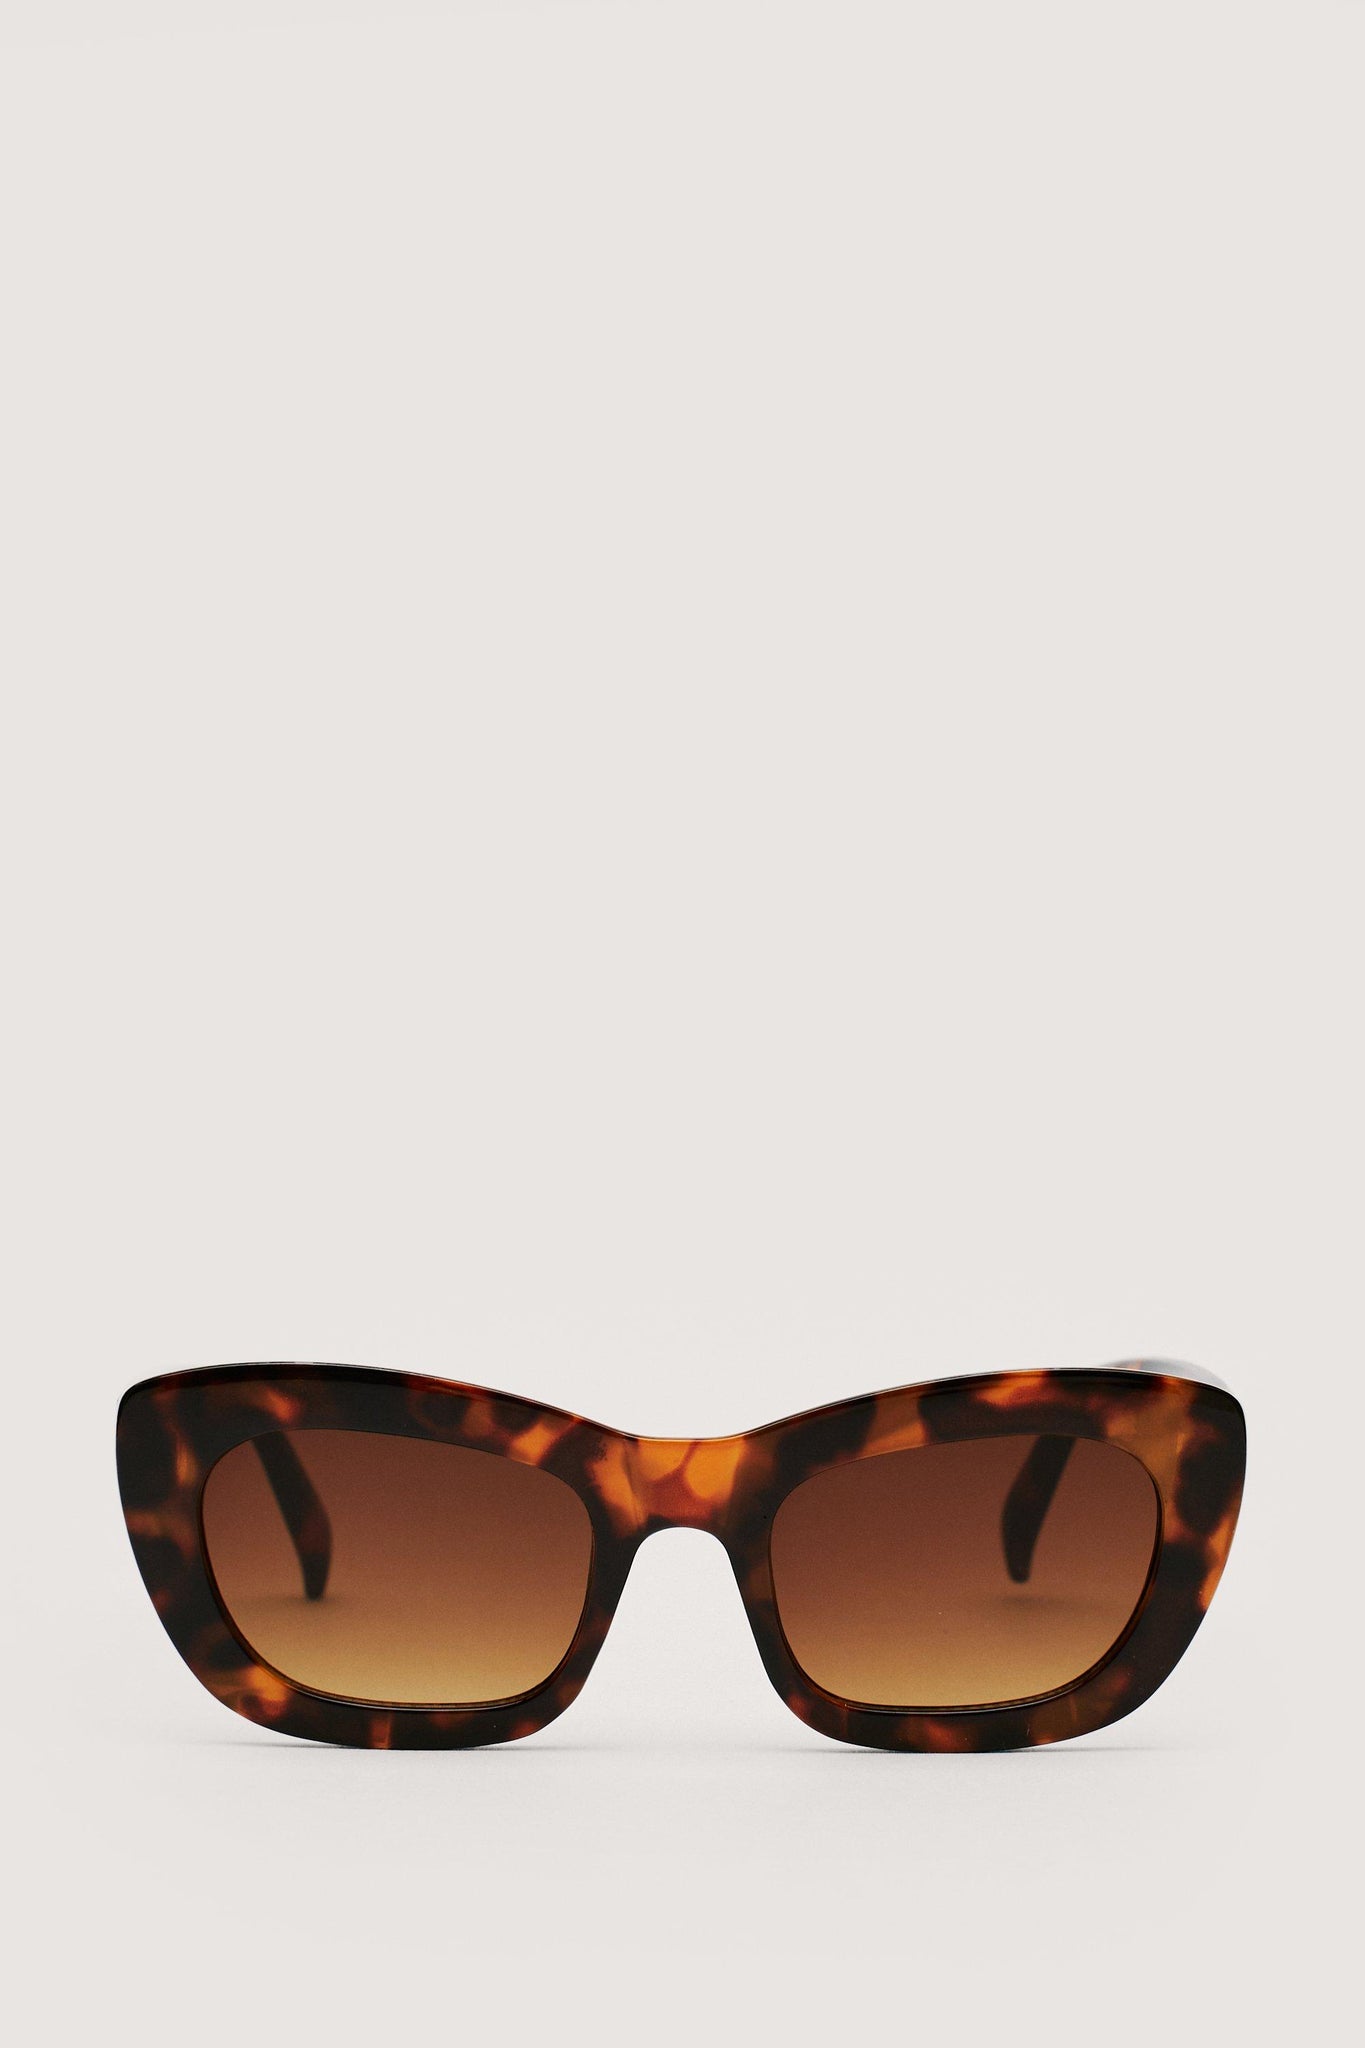 NastyGal Brown Thick Tortoiseshell Cat Eye Womens Sunglasses - Stockpoint Apparel Outlet